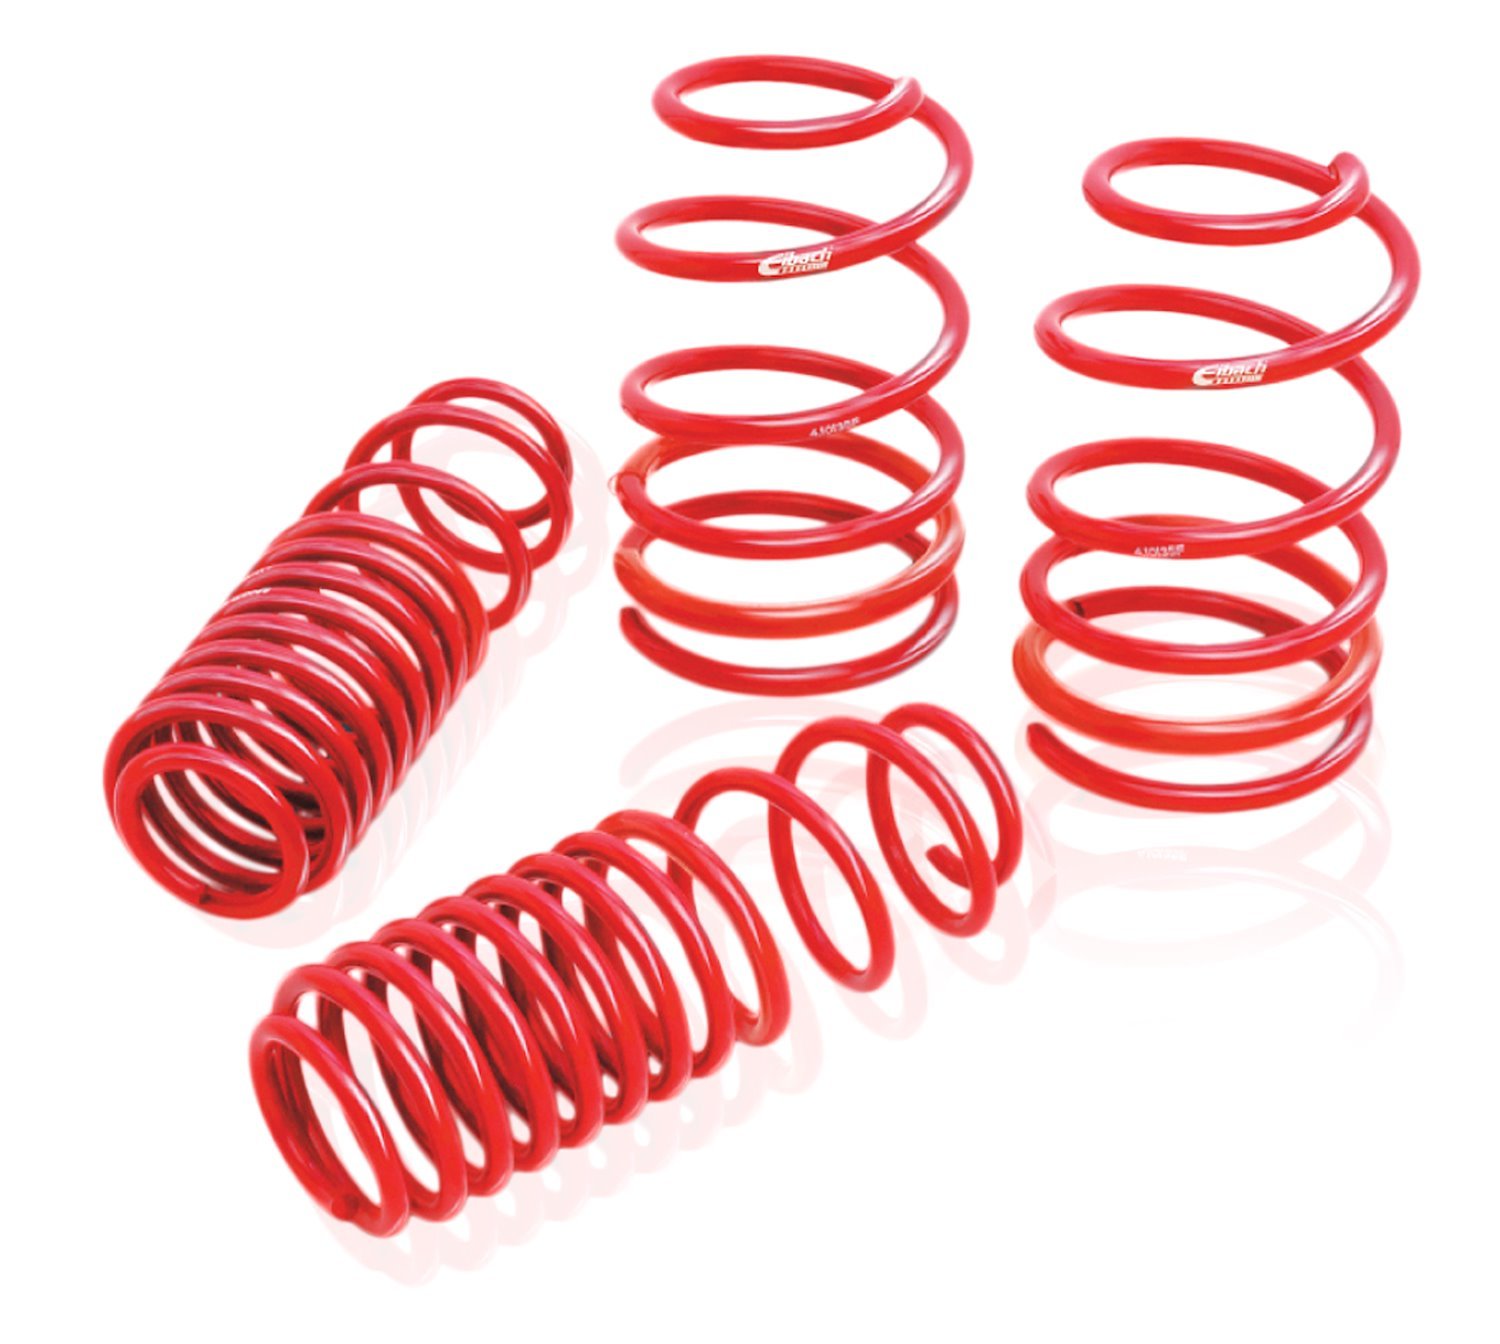 4.10135 Sportline Lowering Springs 2005-10 Mustang V8 Coupe - 1.6" Front/2" Rear Drop